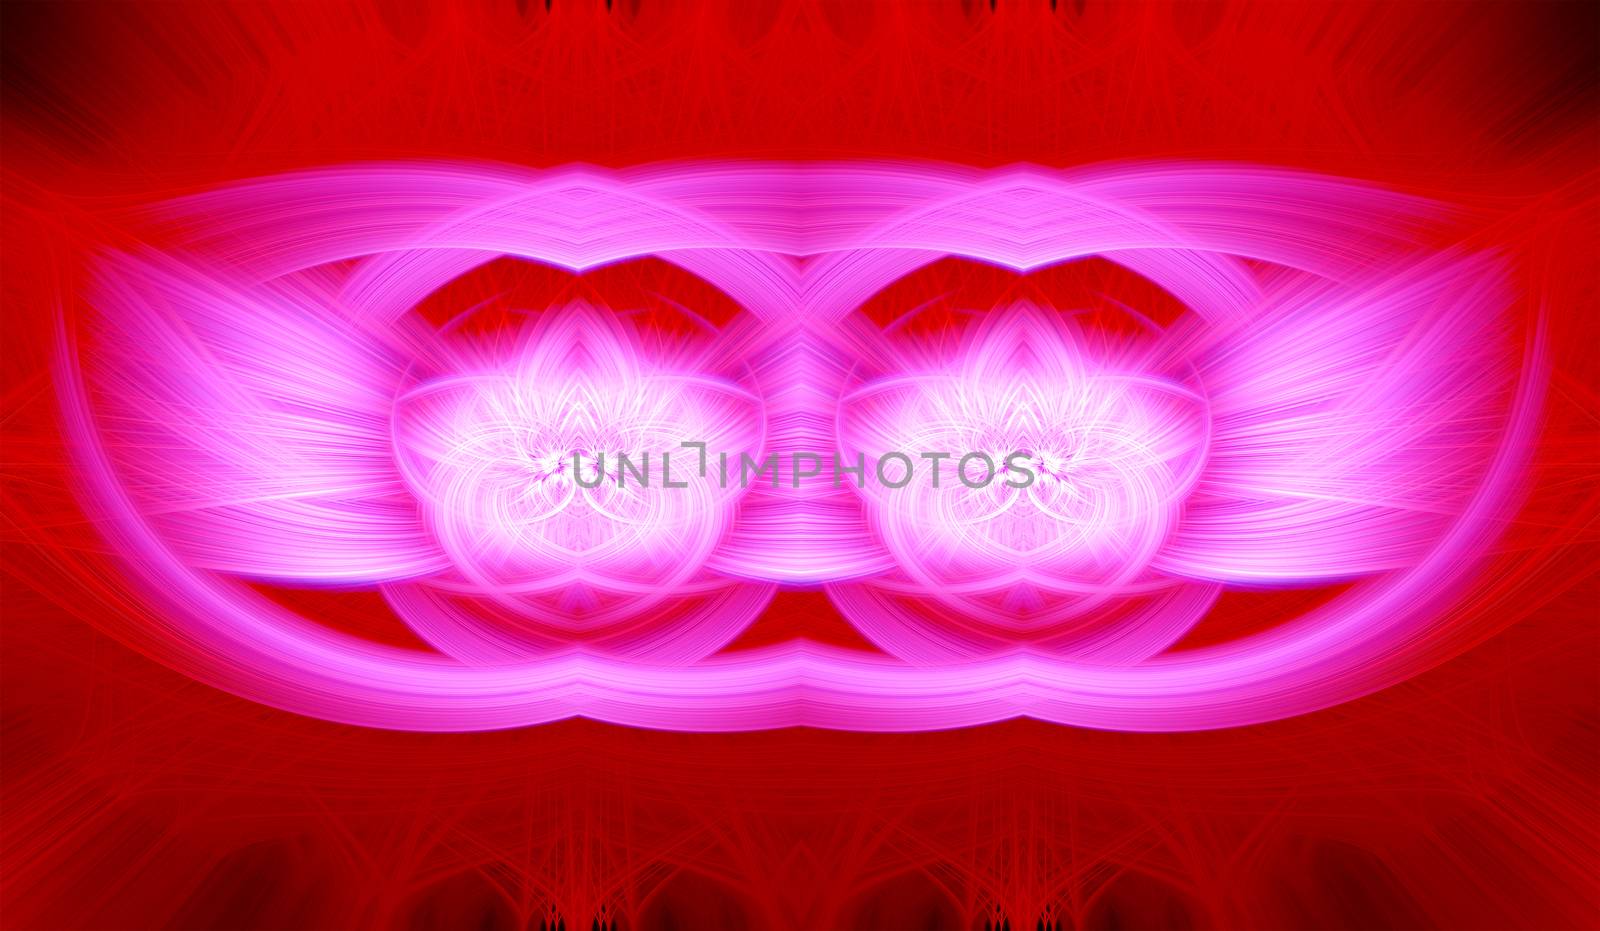 Beautiful abstract intertwined glowing 3d fibers forming a shape of sparkle, flame, flower, interlinked hearts. Maroon, white, red, and pink colors. Banner size. Illustration by DamantisZ